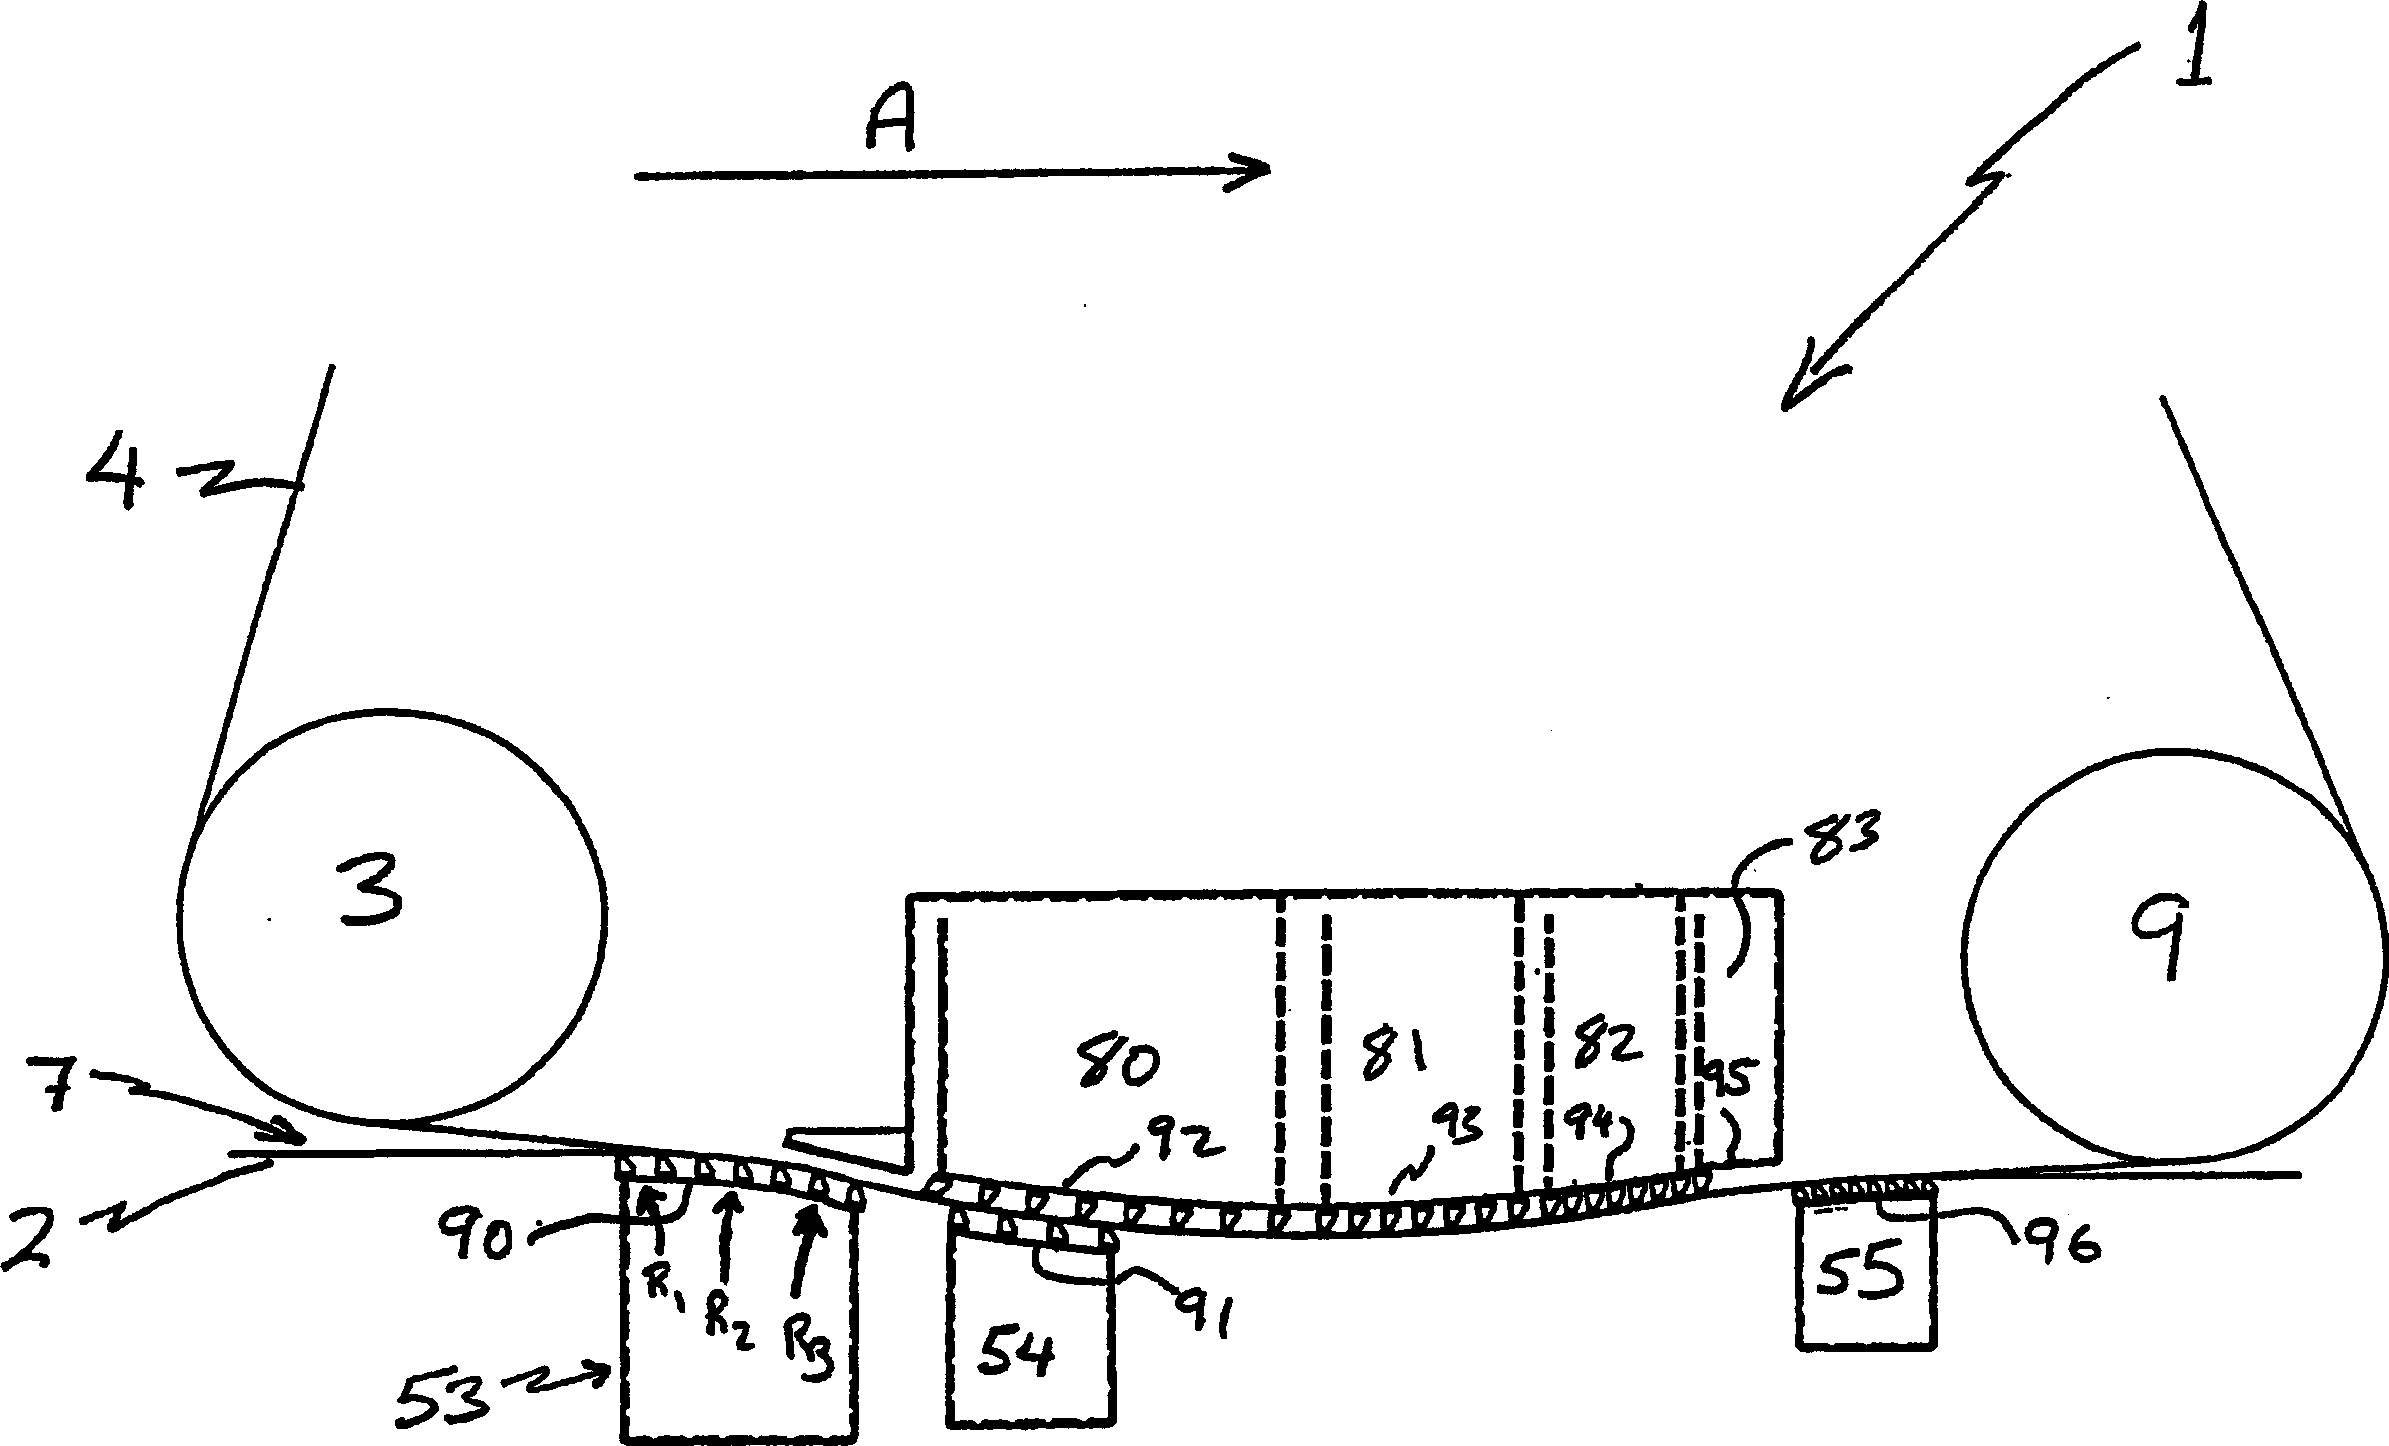 Hybrid type forming section for a paper making machine